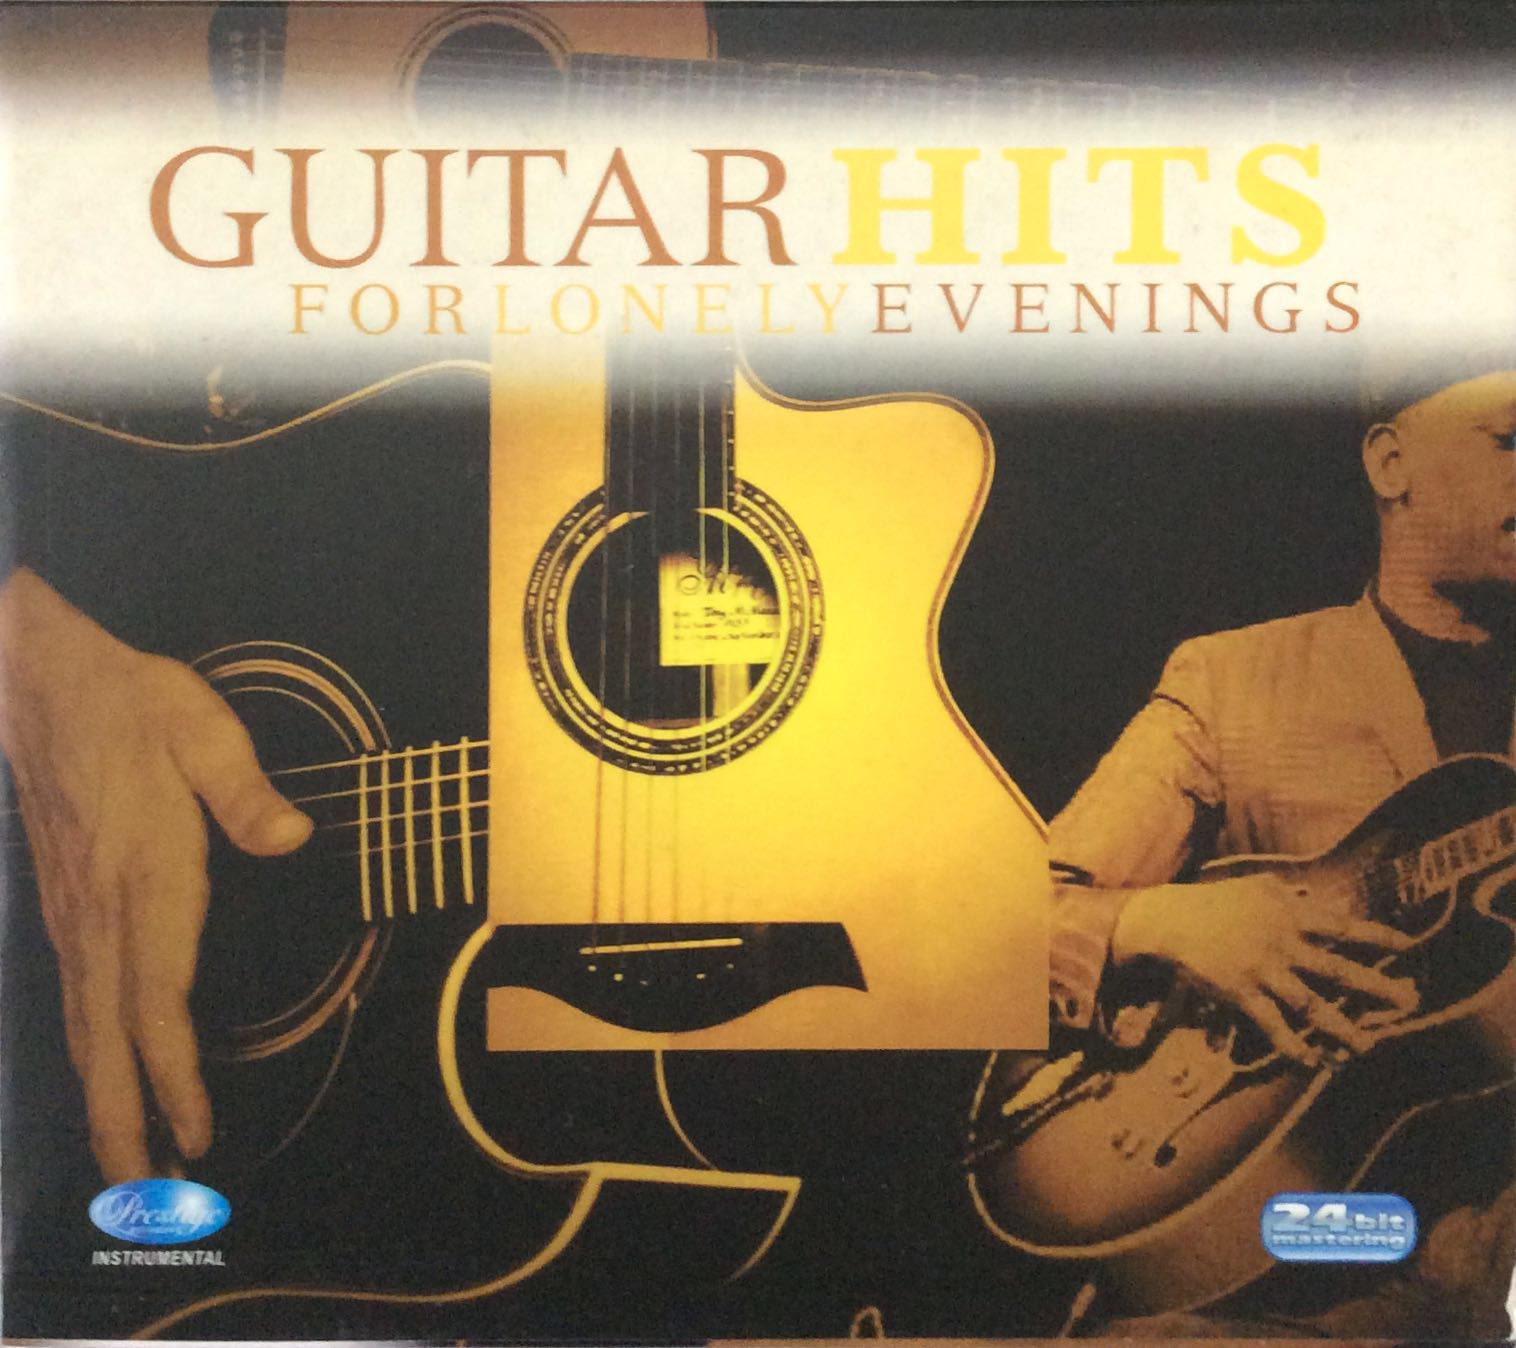 GUITAR HITS FOR LONELY EVENINGS 24bit Remastering CD